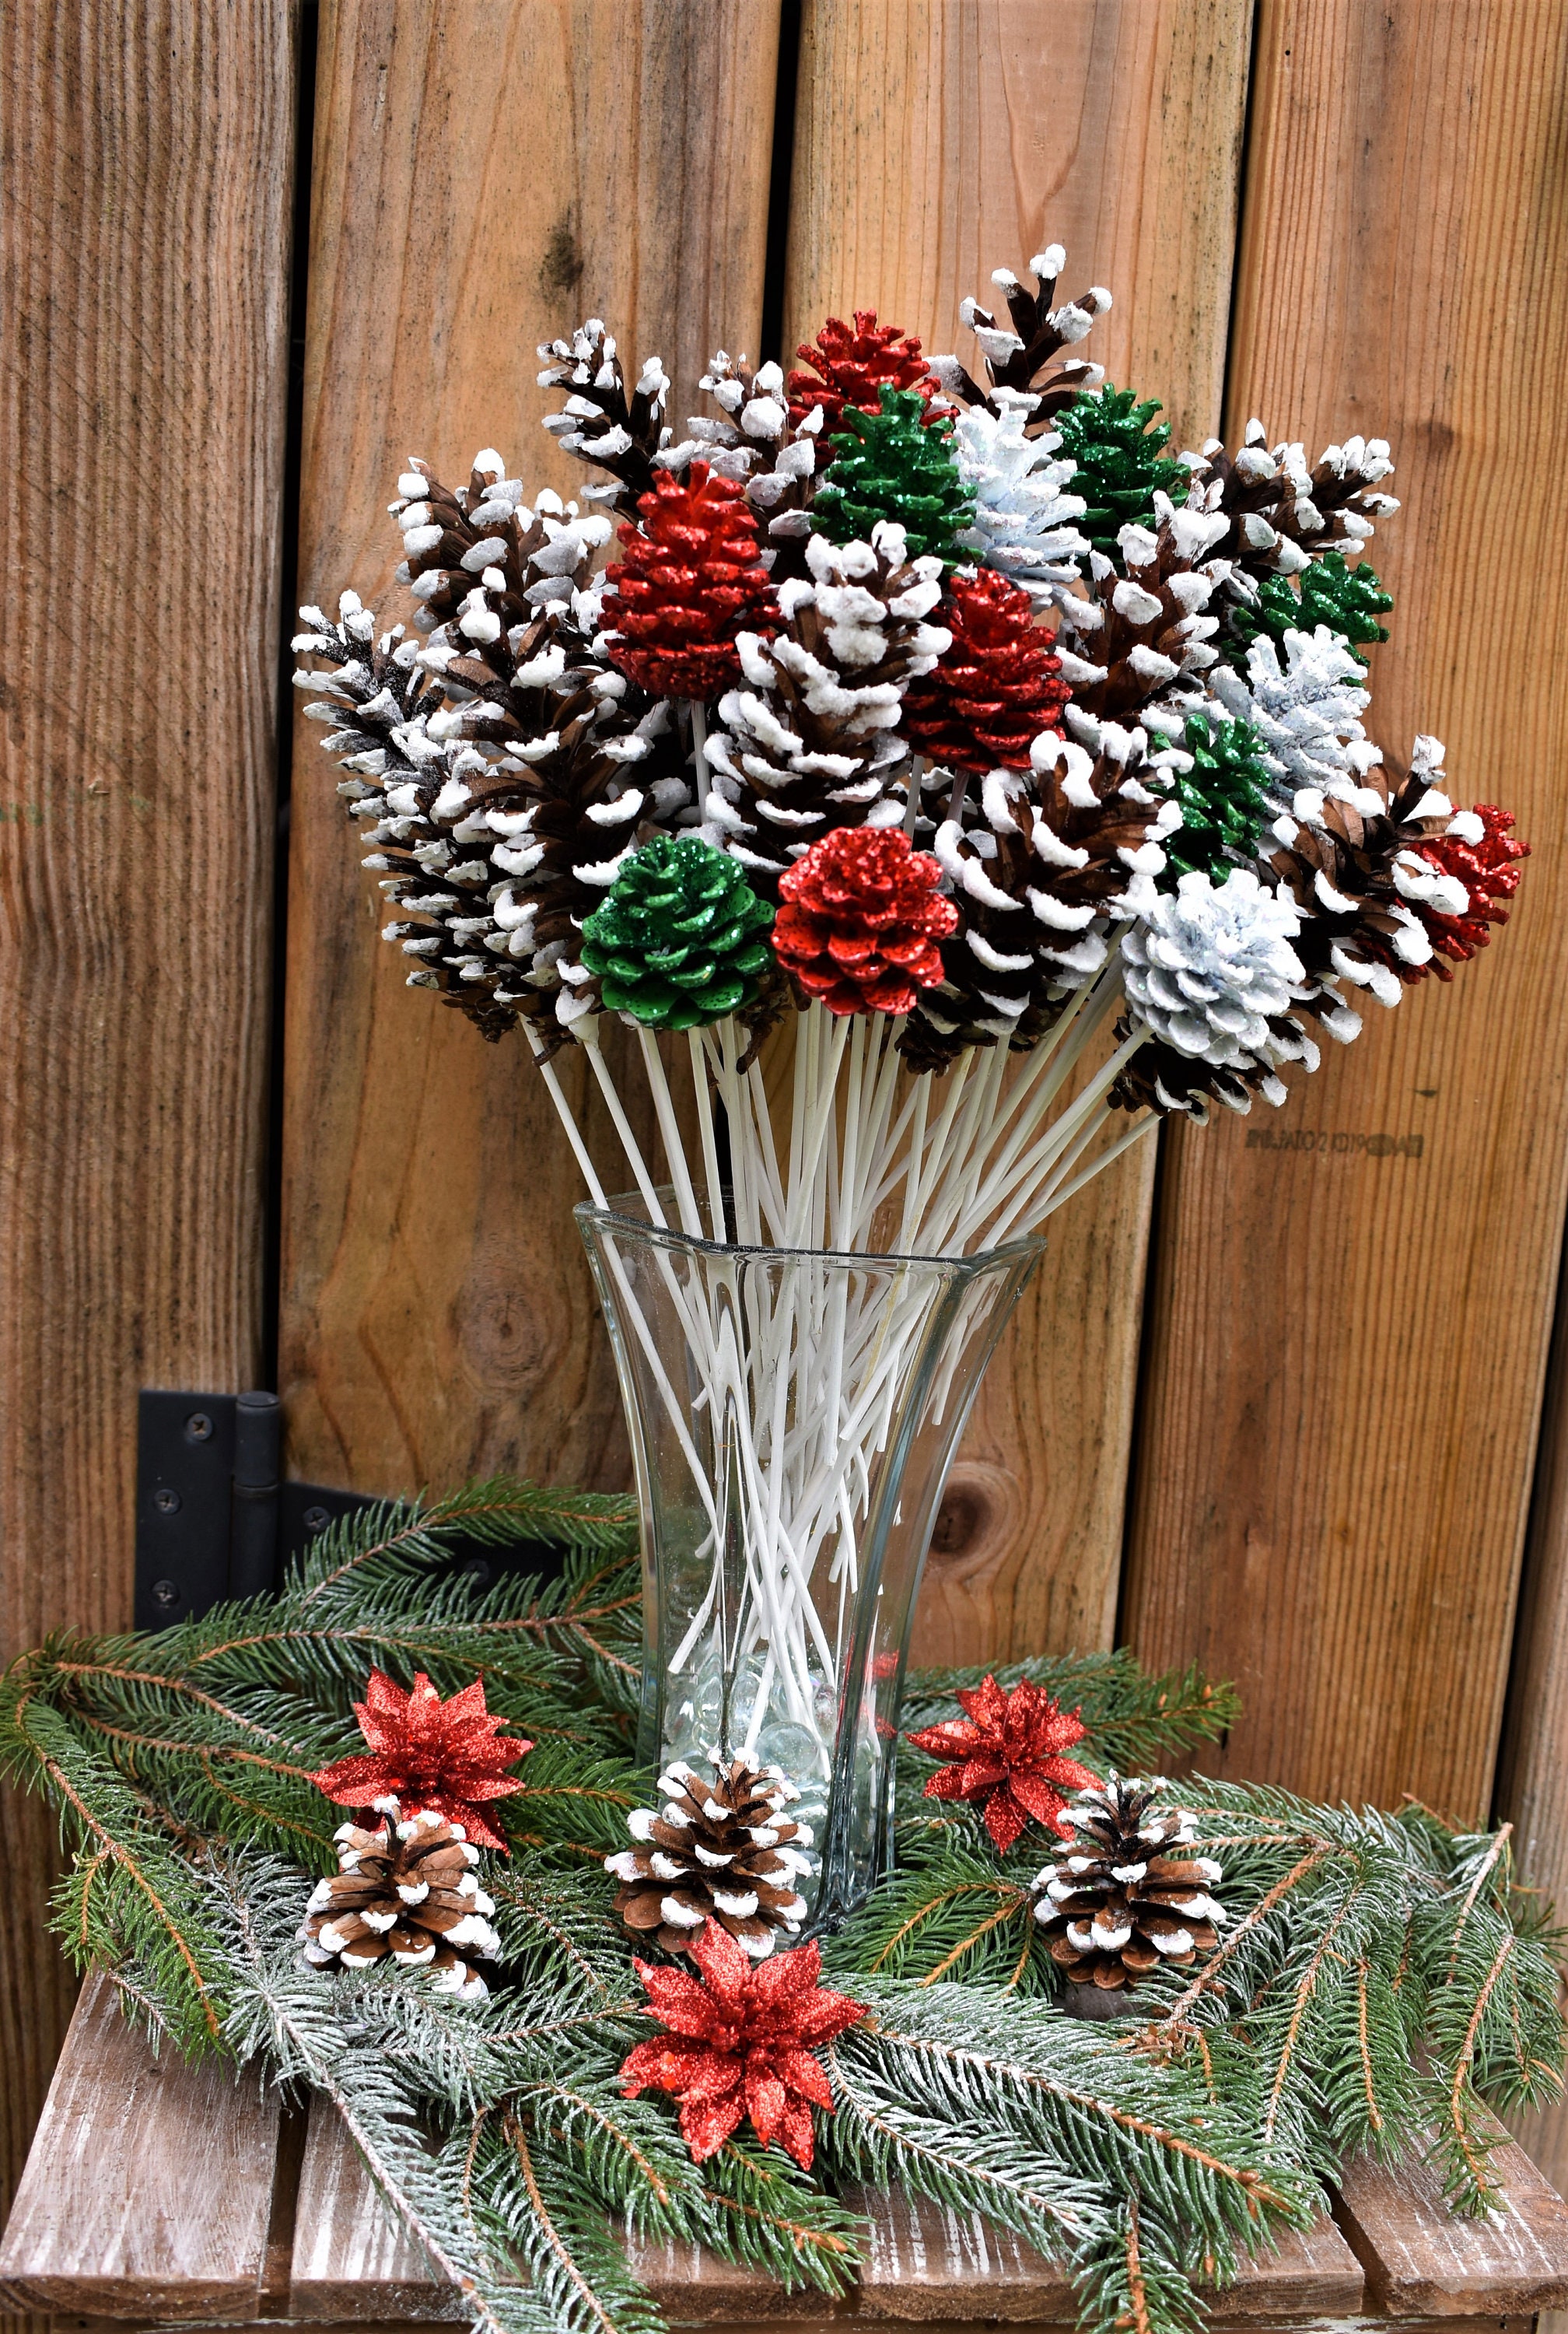 Pine Cone Flowers, One Dozen. Sparkly Snow White and Metallic Silver and  Gold. on 12-inch Stems. Christmas, Winter Decor, Floral Picks. 